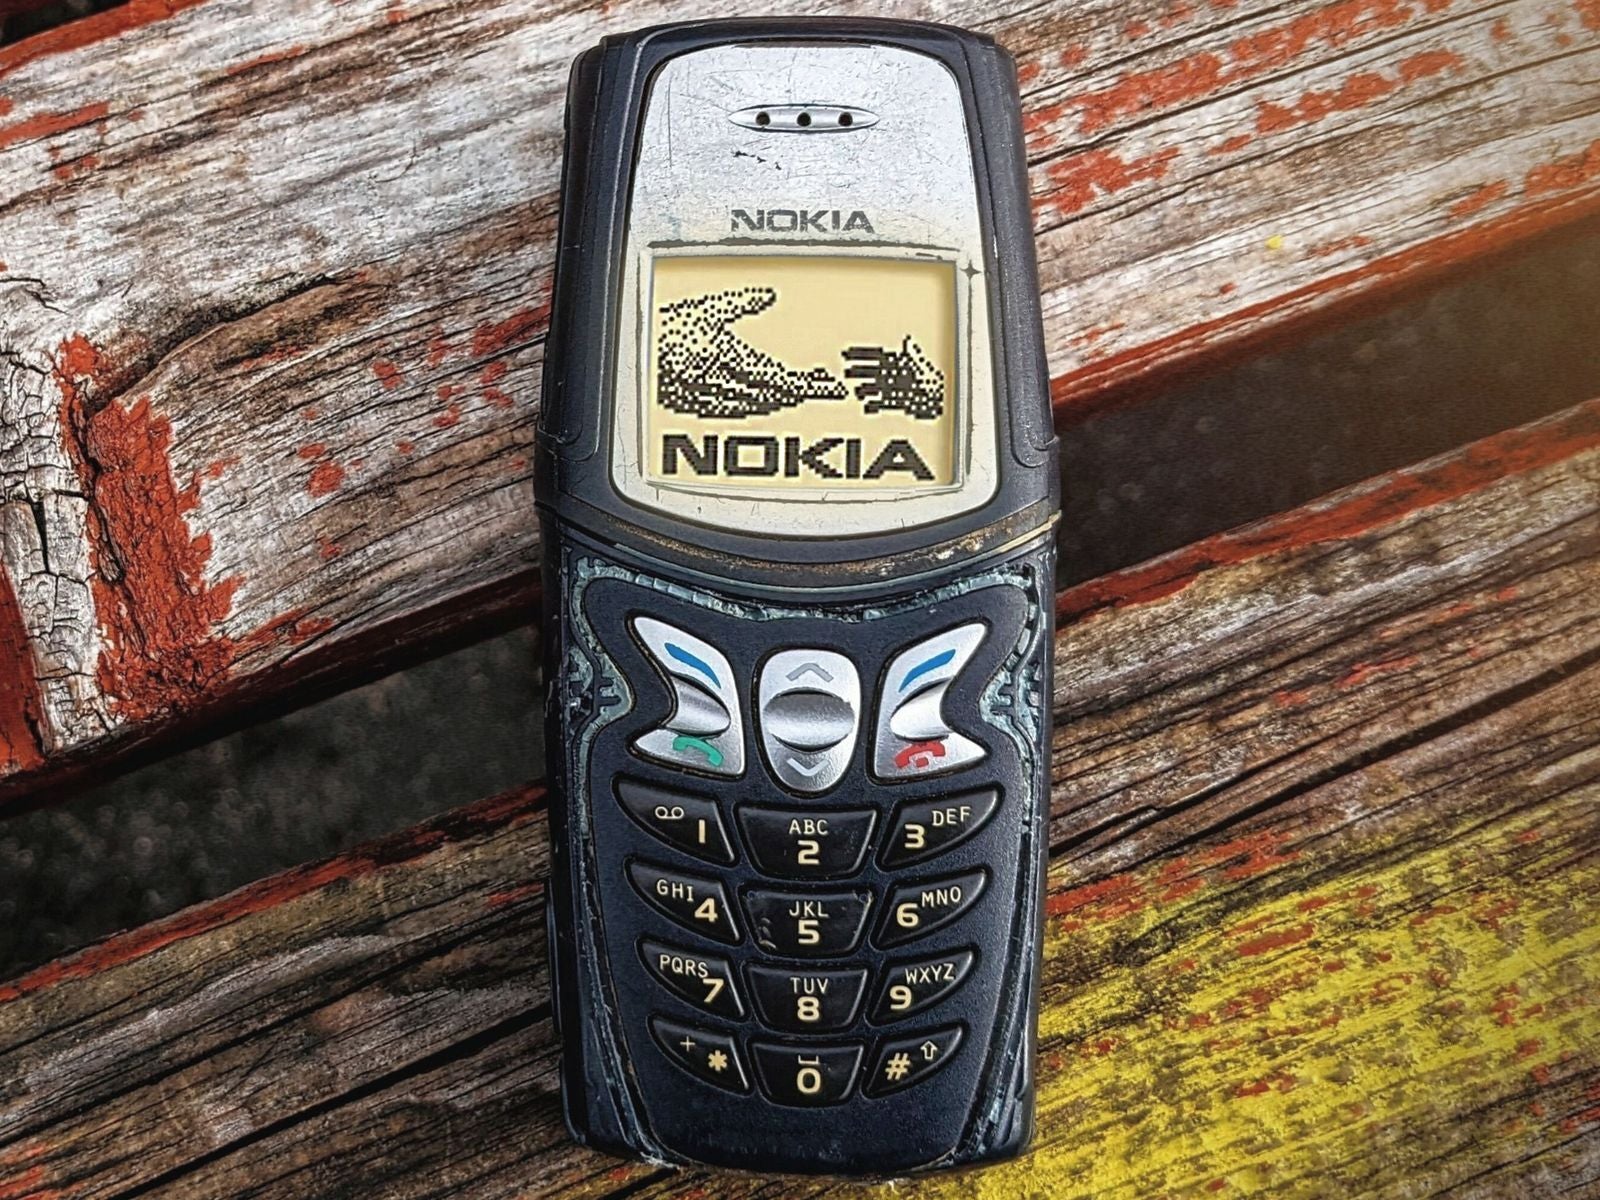 The 5210 really helped connect people, in more ways than one. - Nokia 3310 might have been indestructible, but my 5210 beat it by a long shot